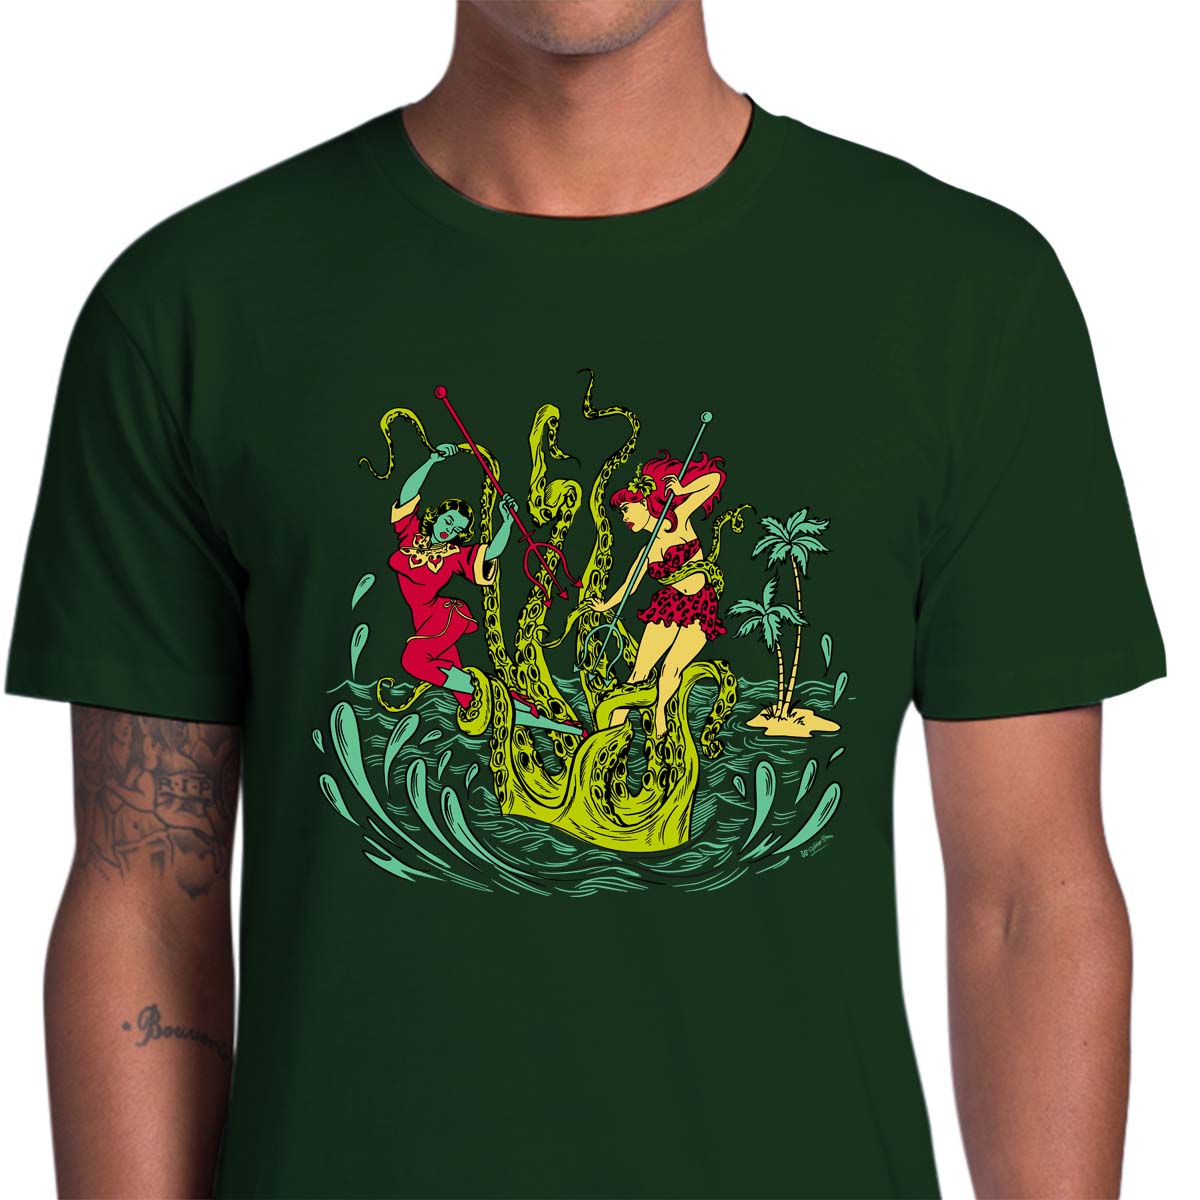 Unisex dark-forest-green tee shirt with a graphic of two women battling a giant Kracken